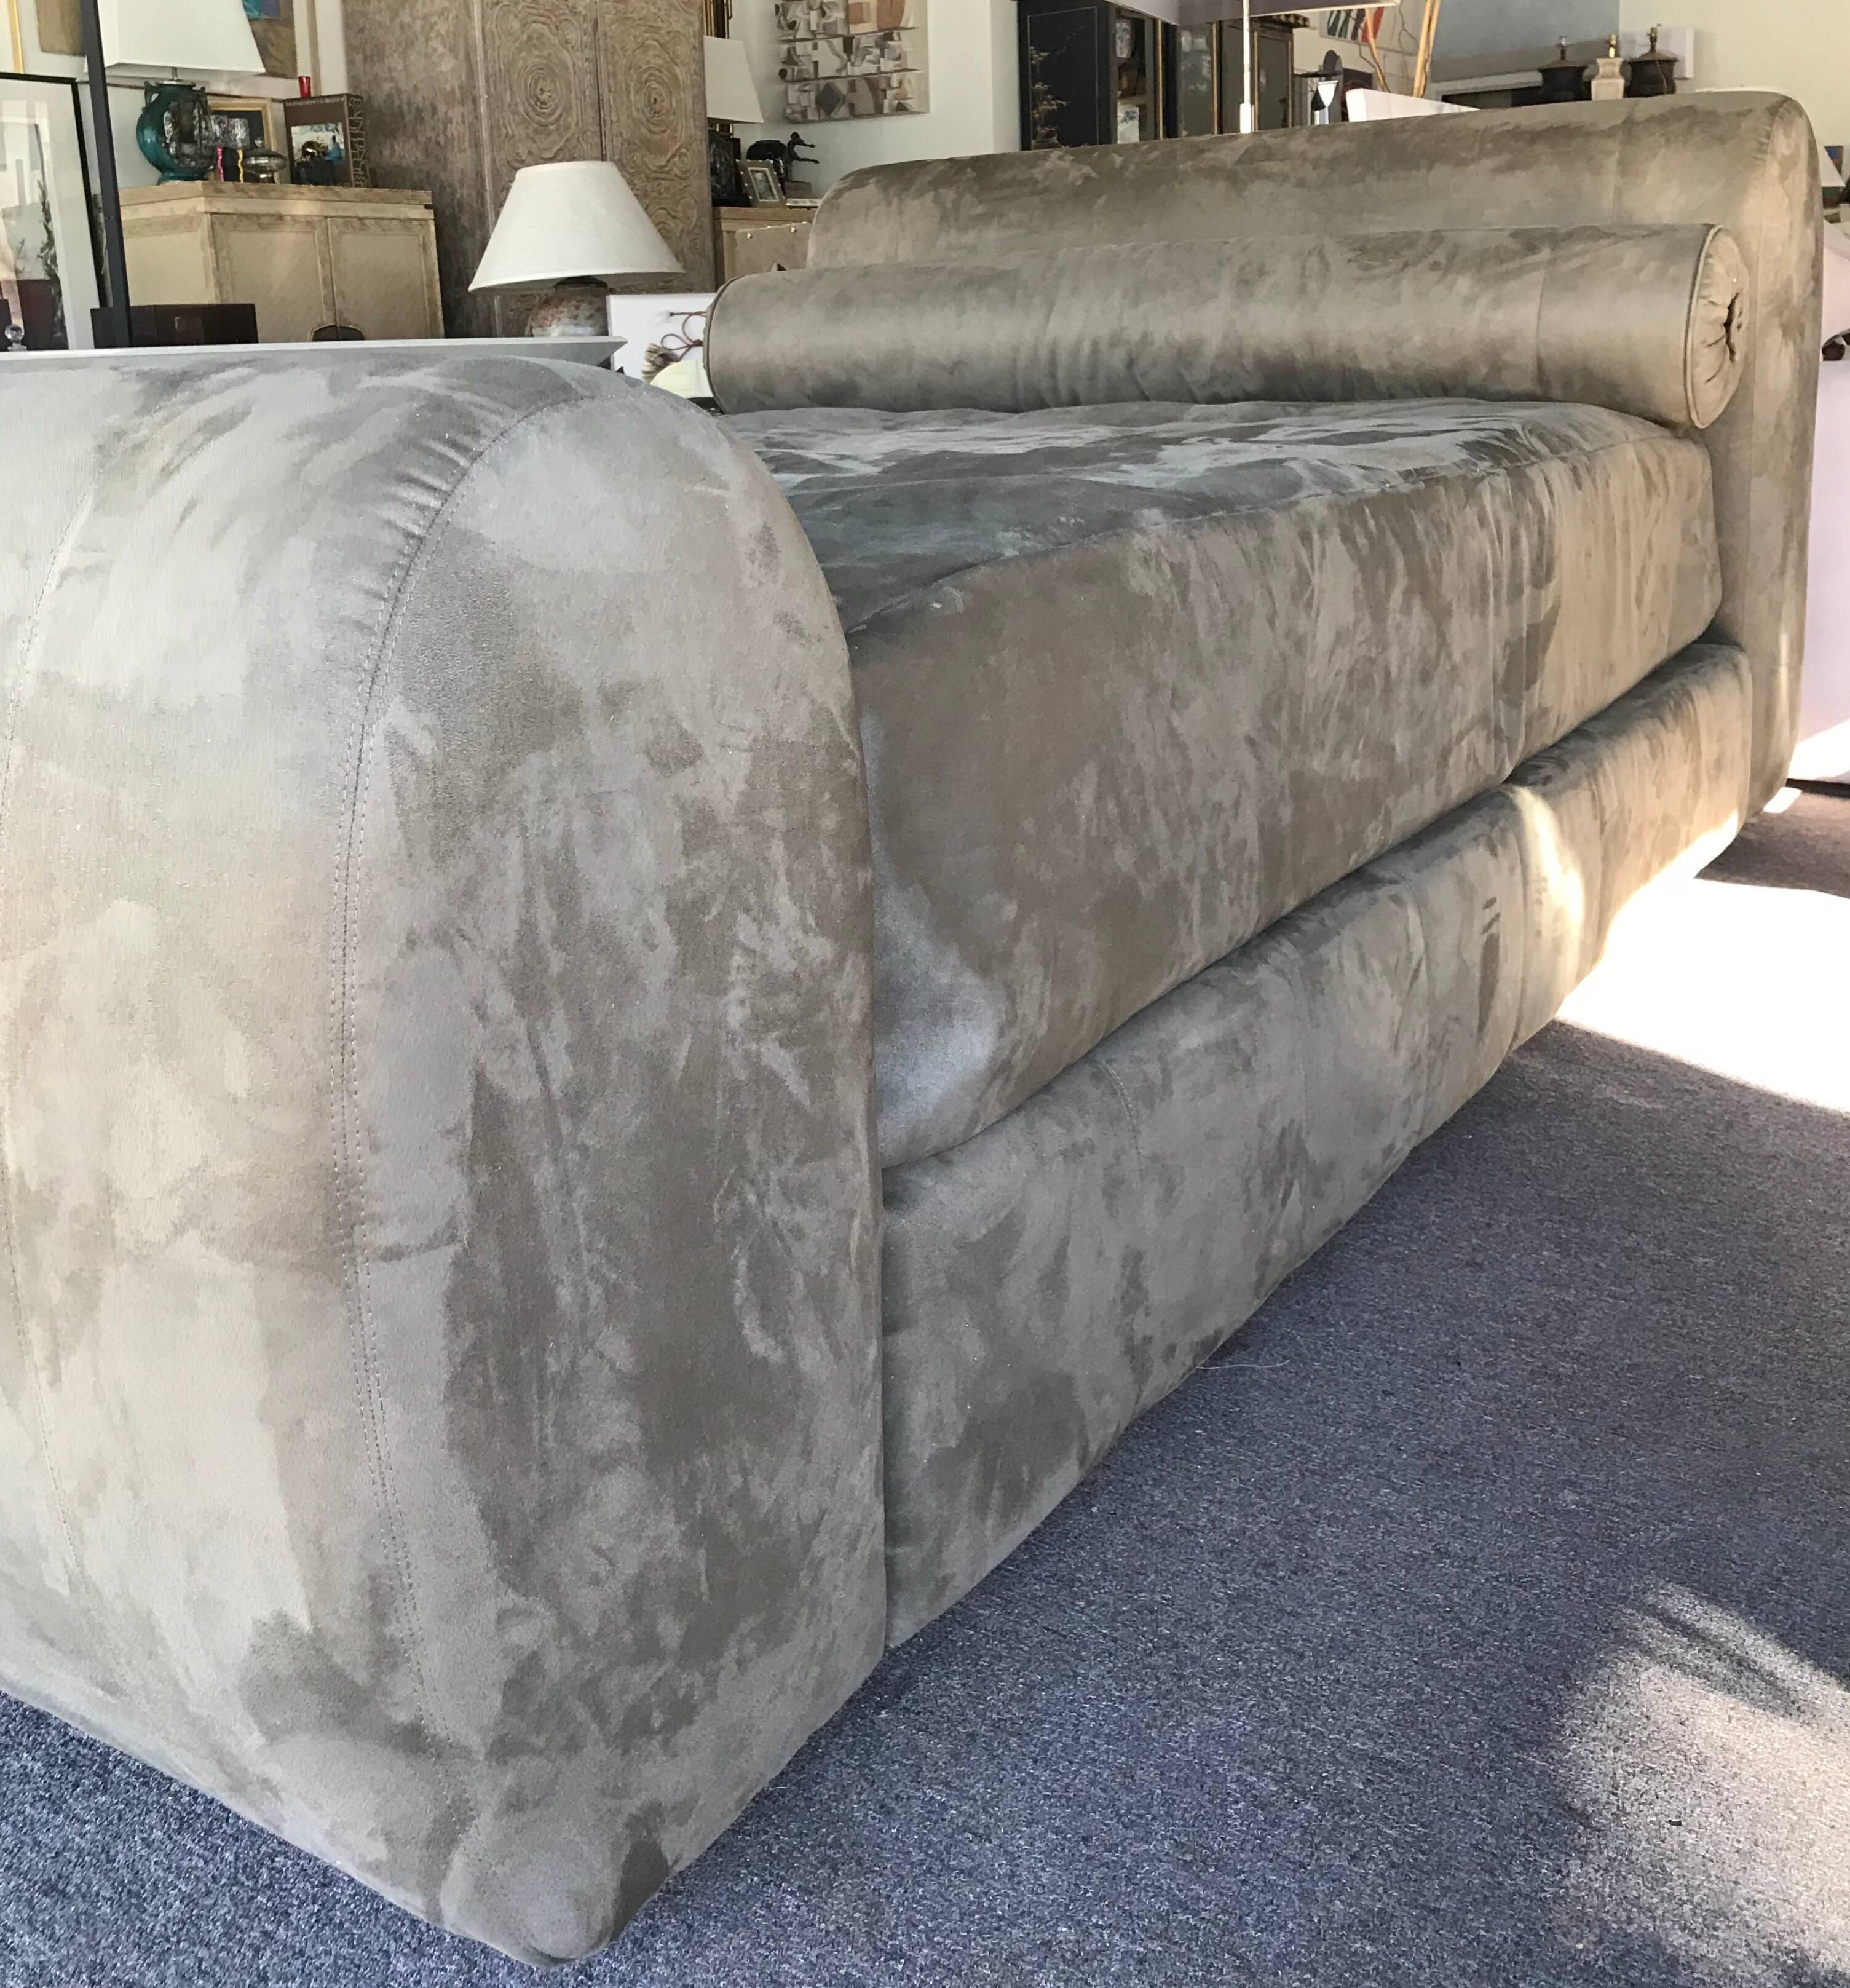 This bed came from a multimillion dollar estate in Tamarisk Country Club in Rancho Mirage, CA. The custom-made queen-size bed is upholstered entirely in a high end elephant color ultra-suede. Bed consists of: headboard, platform, footboard and long